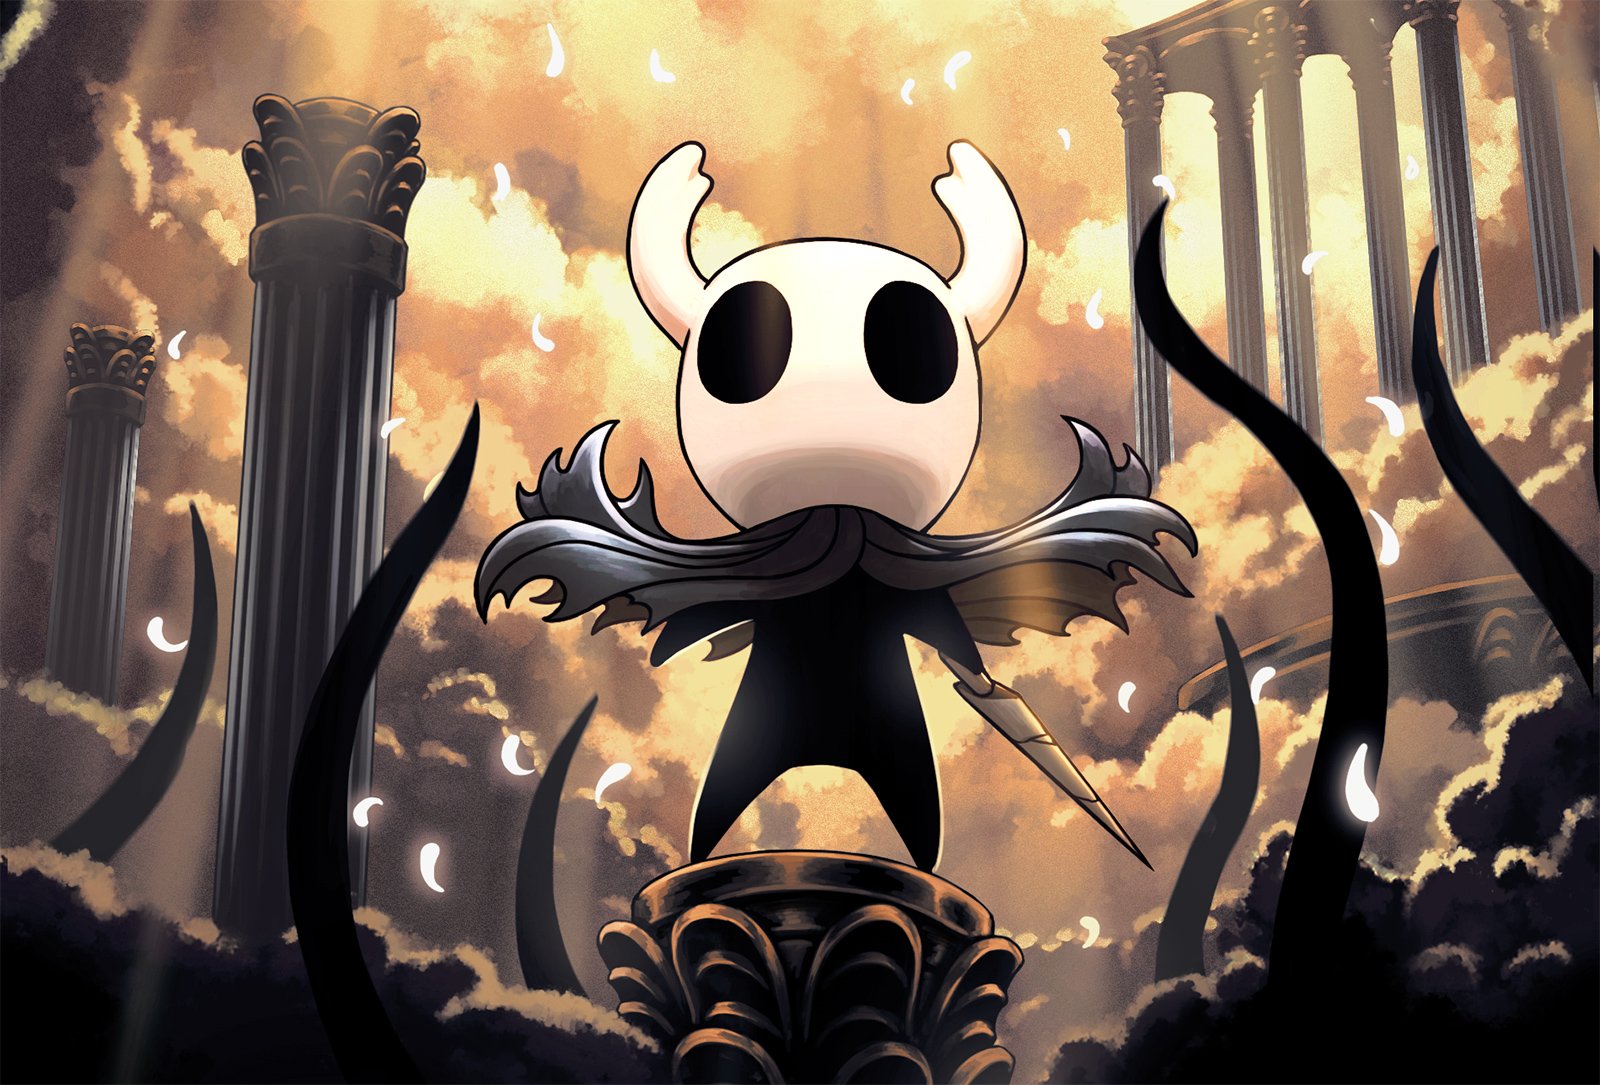 Hollow Knight available on Nintendo Switch today